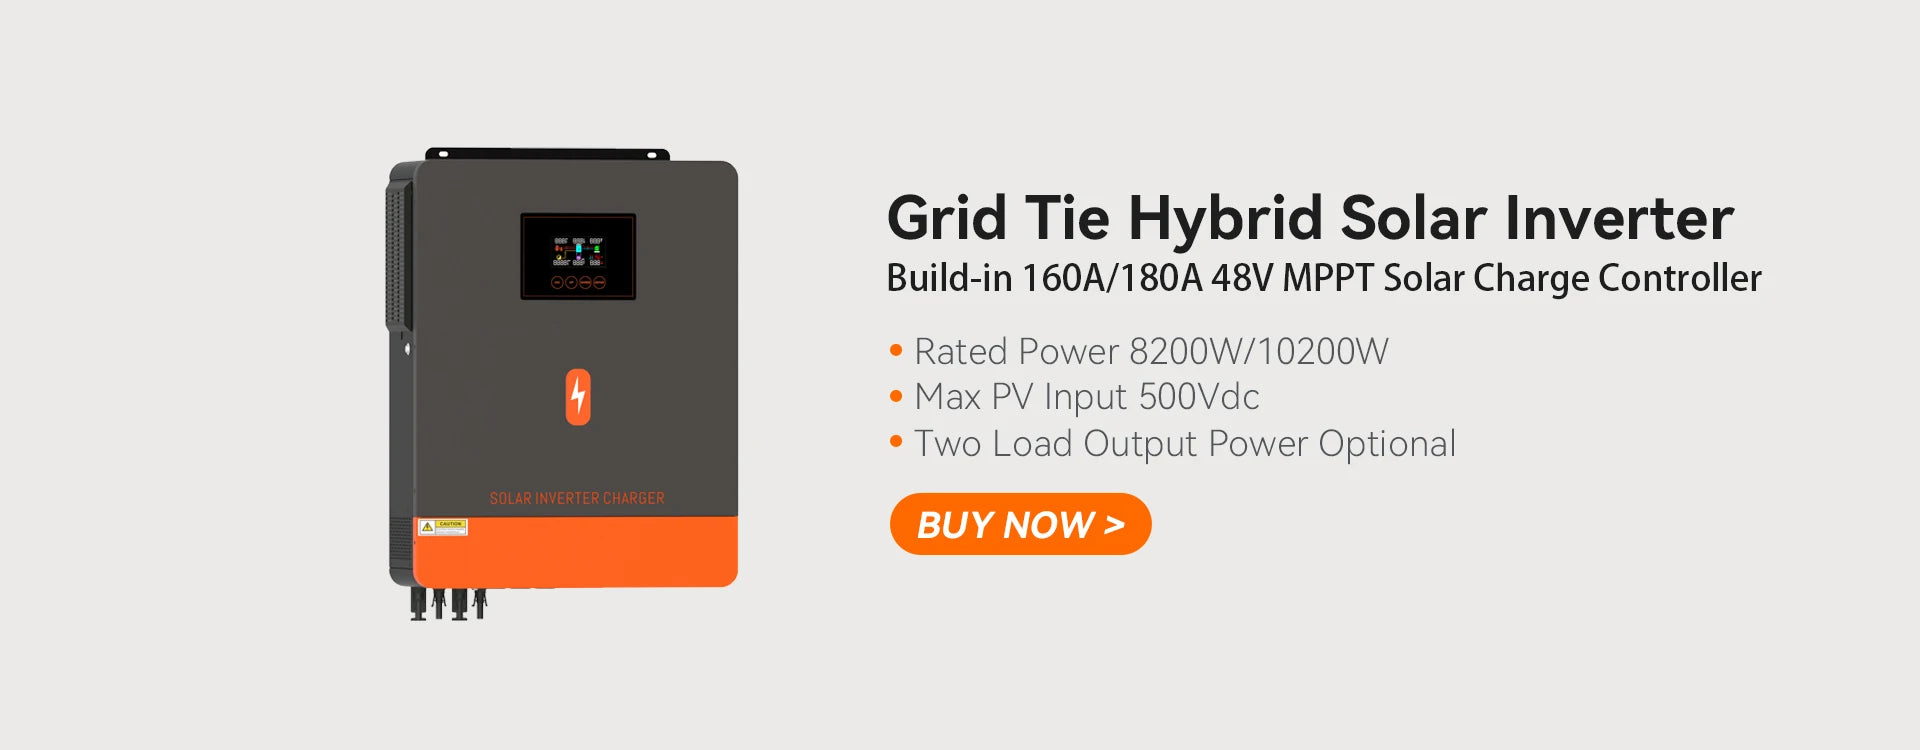 PowMr Solar Inverter, Grid Tie Hybrid Solar Inverter with built-in charge controller and high-power conversion capabilities.